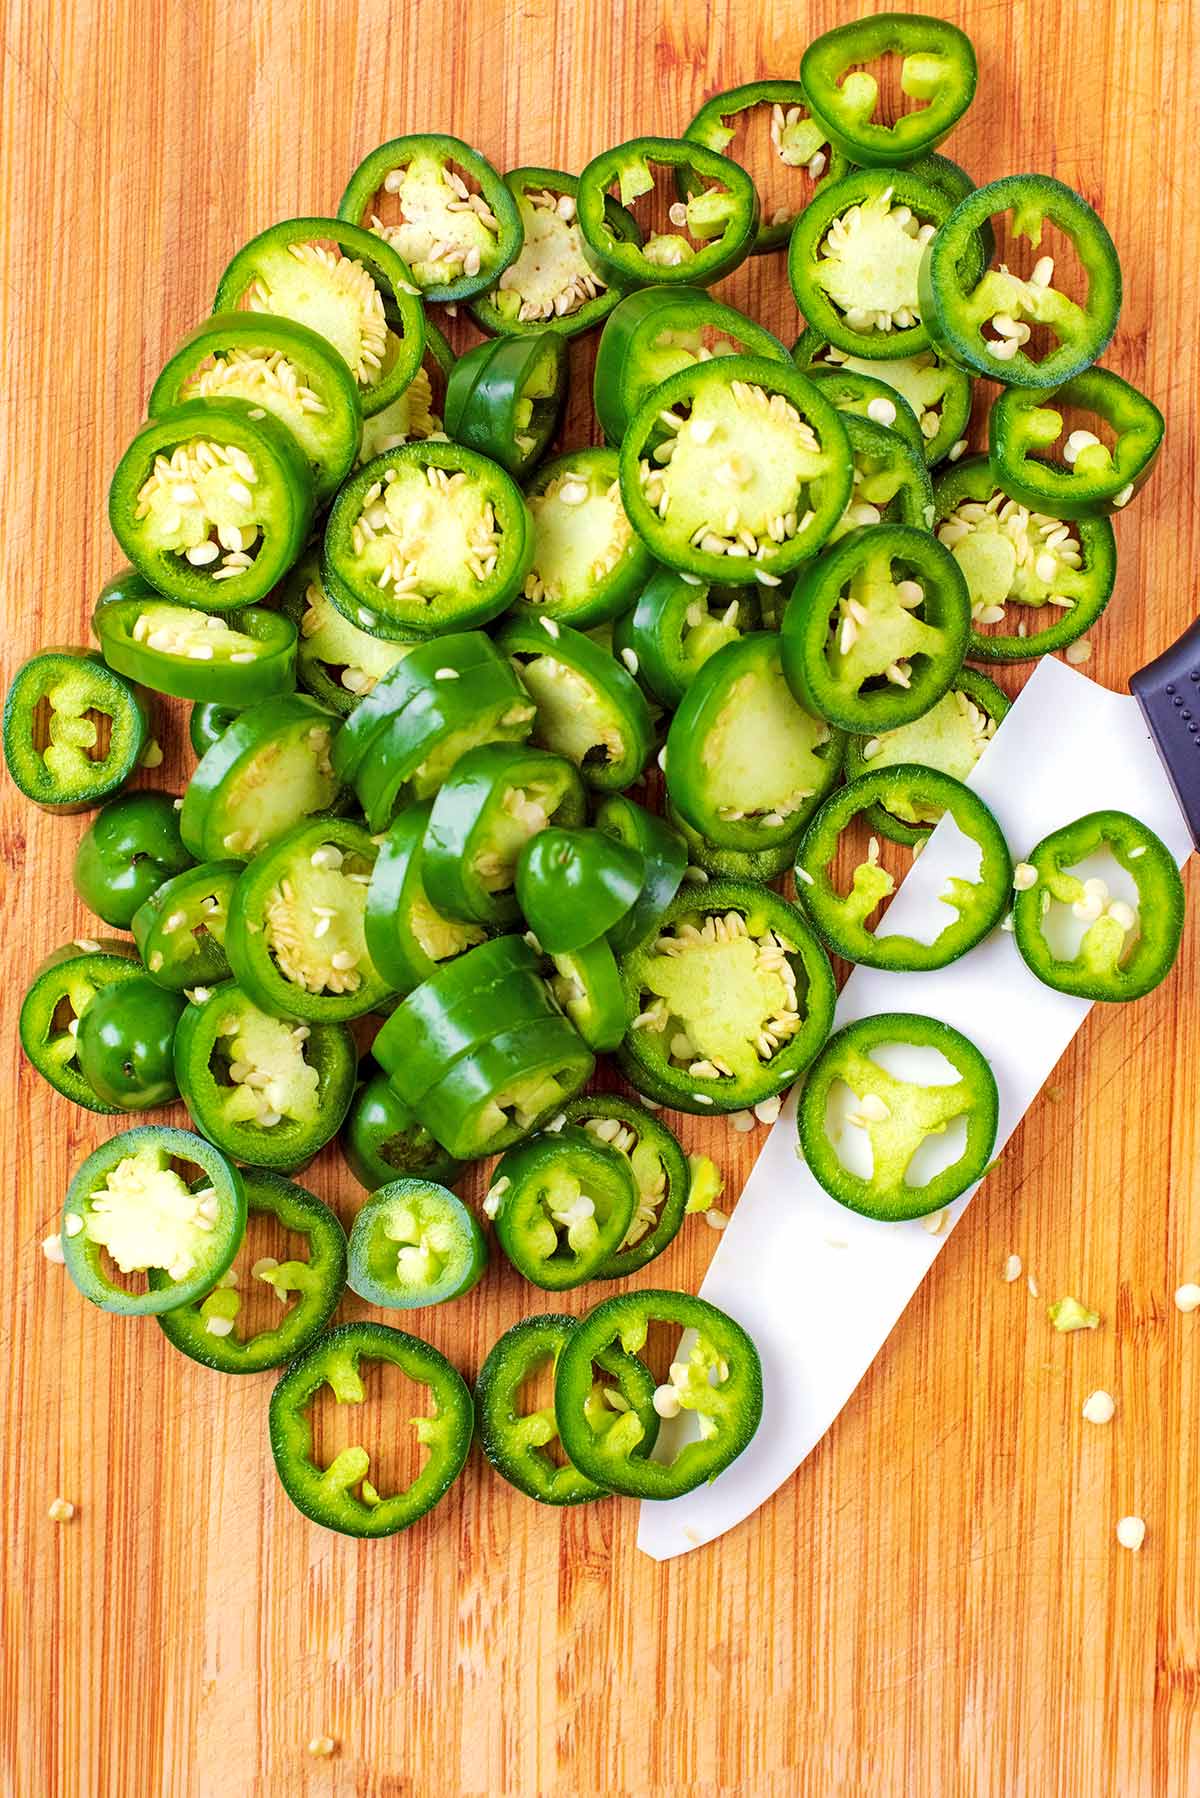 Sliced jalapenos on a wooden chopping board.